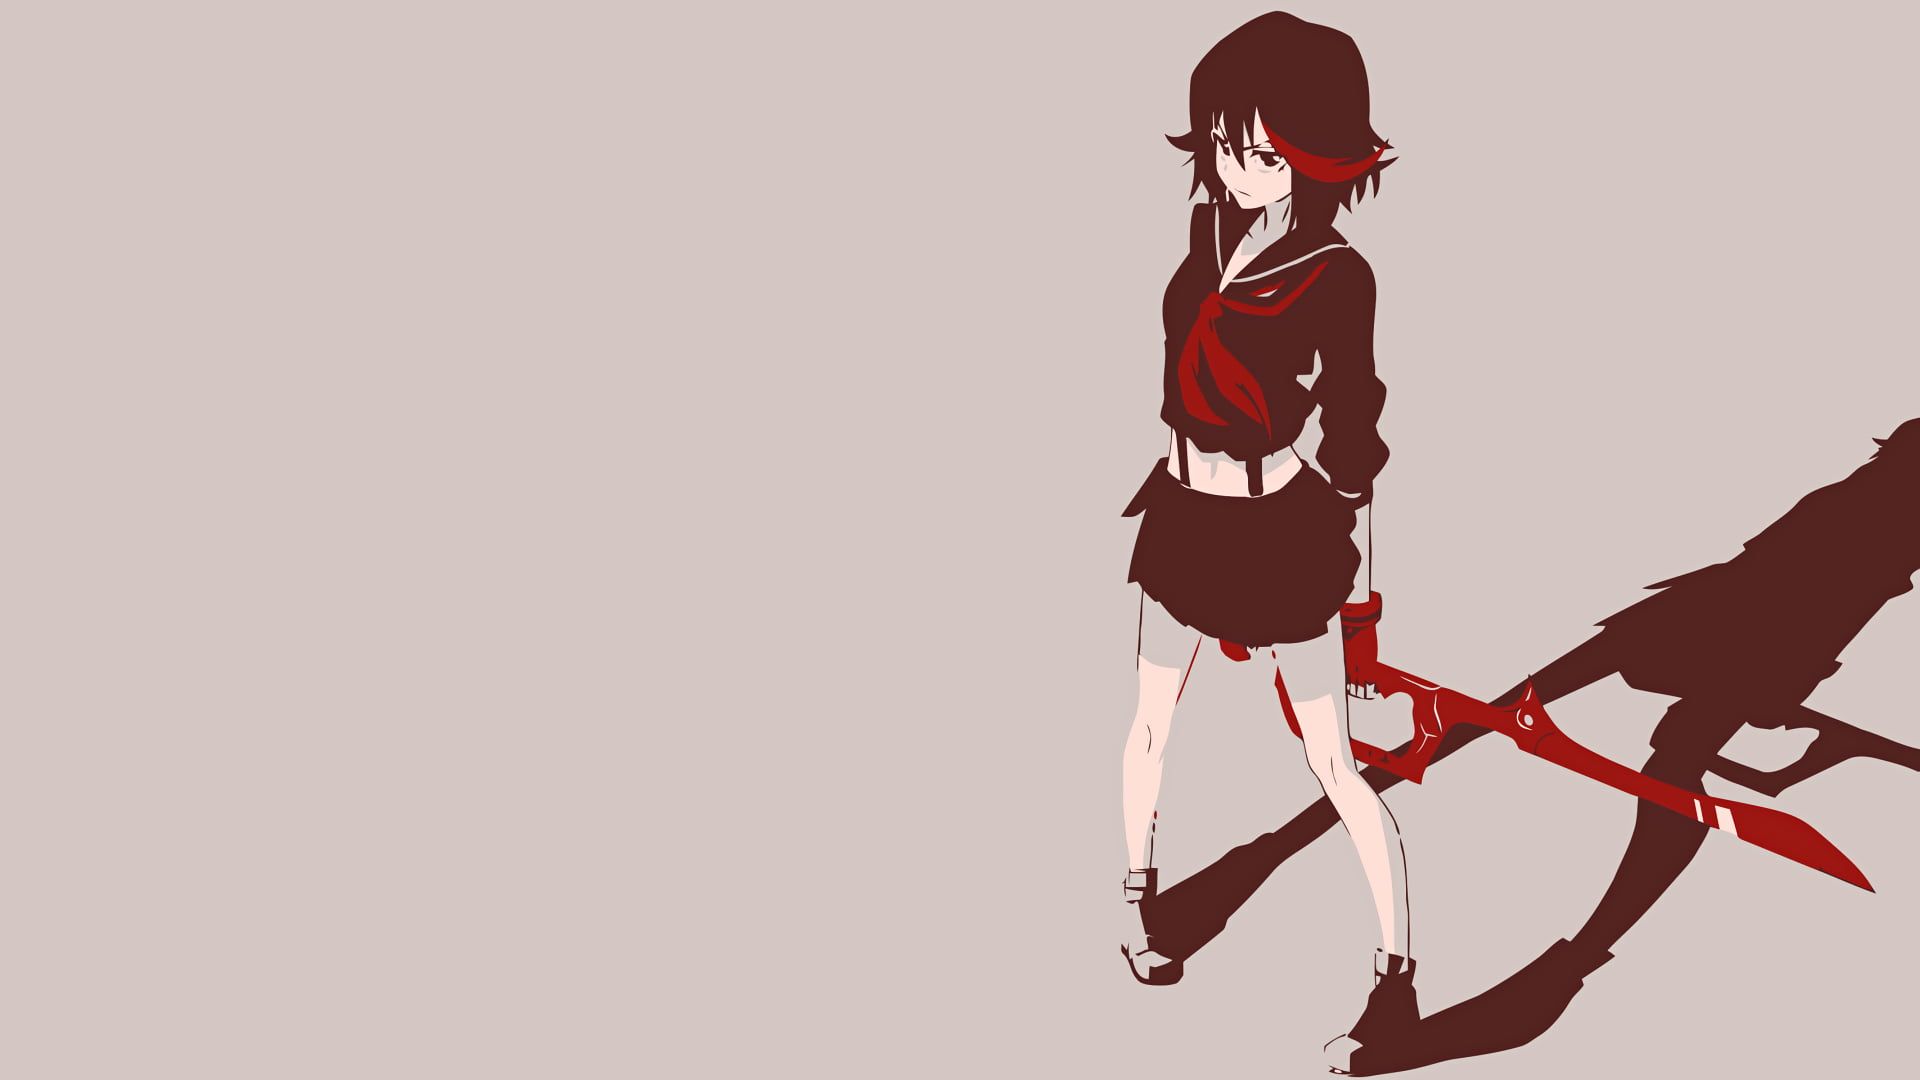 Female anime character standing against her shadow illustration HD